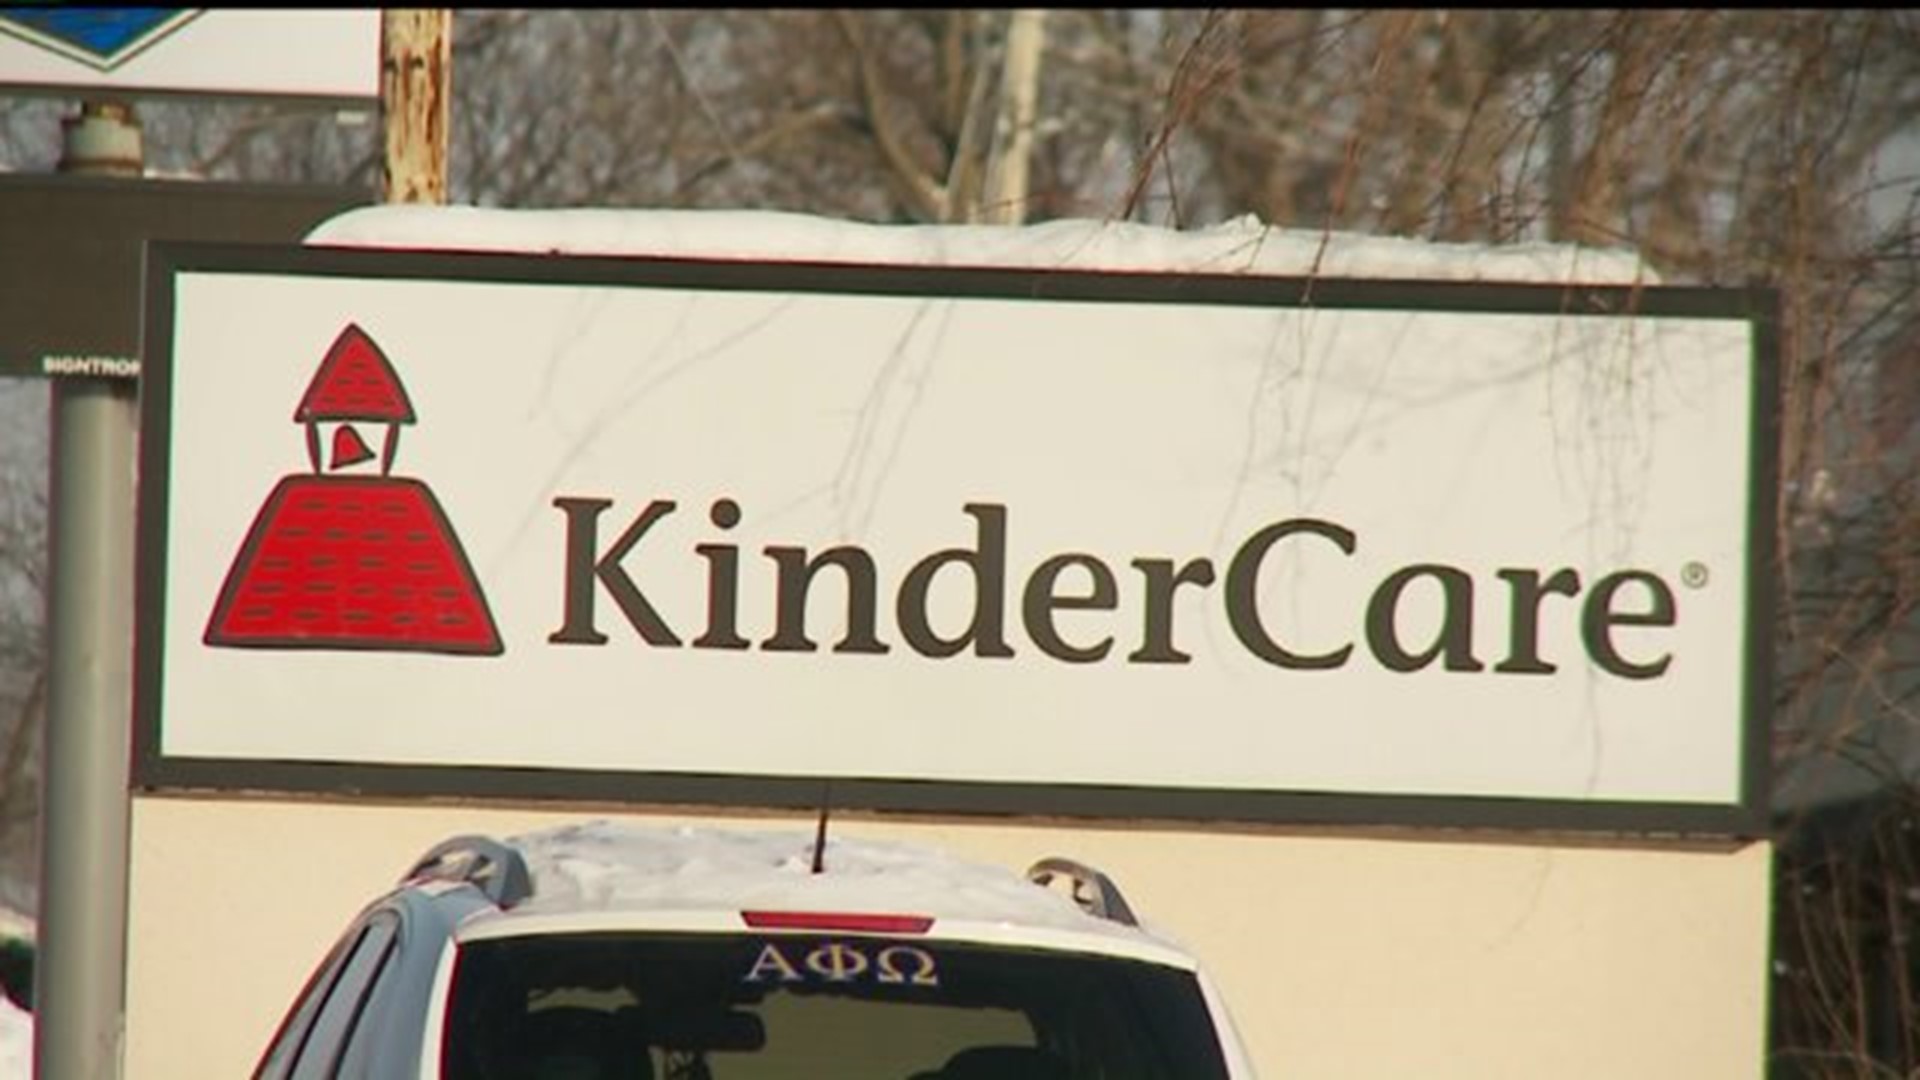 KinderCare requires vaccinations